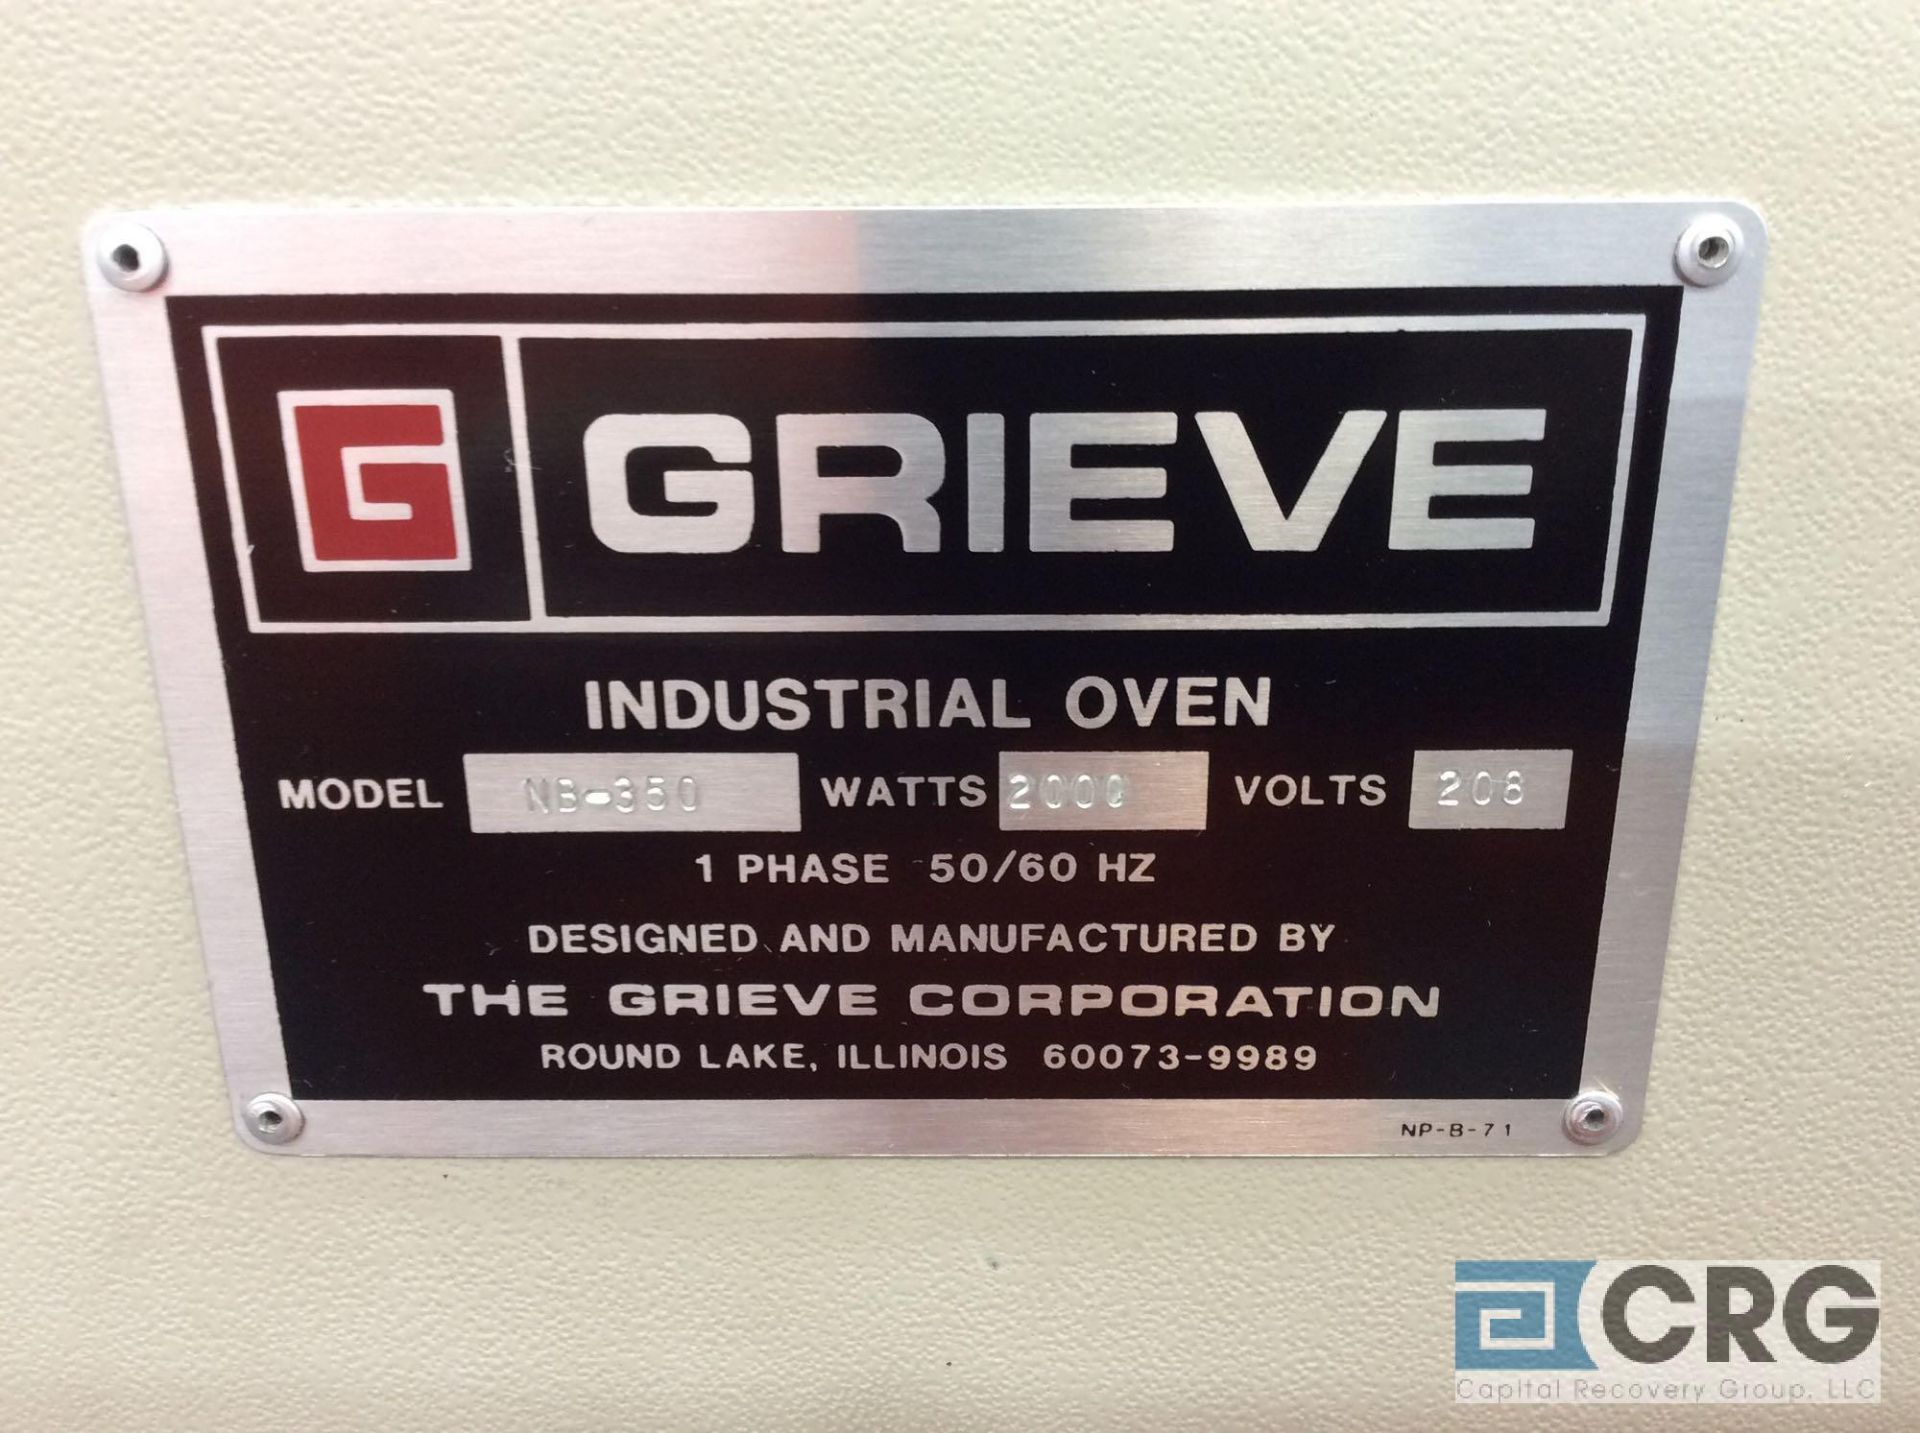 Grieve Industrial oven, mn NB-350, 2000 watts, 208 volts, 3 phase, 28 wide x 18 high x 24 deep - Image 2 of 3